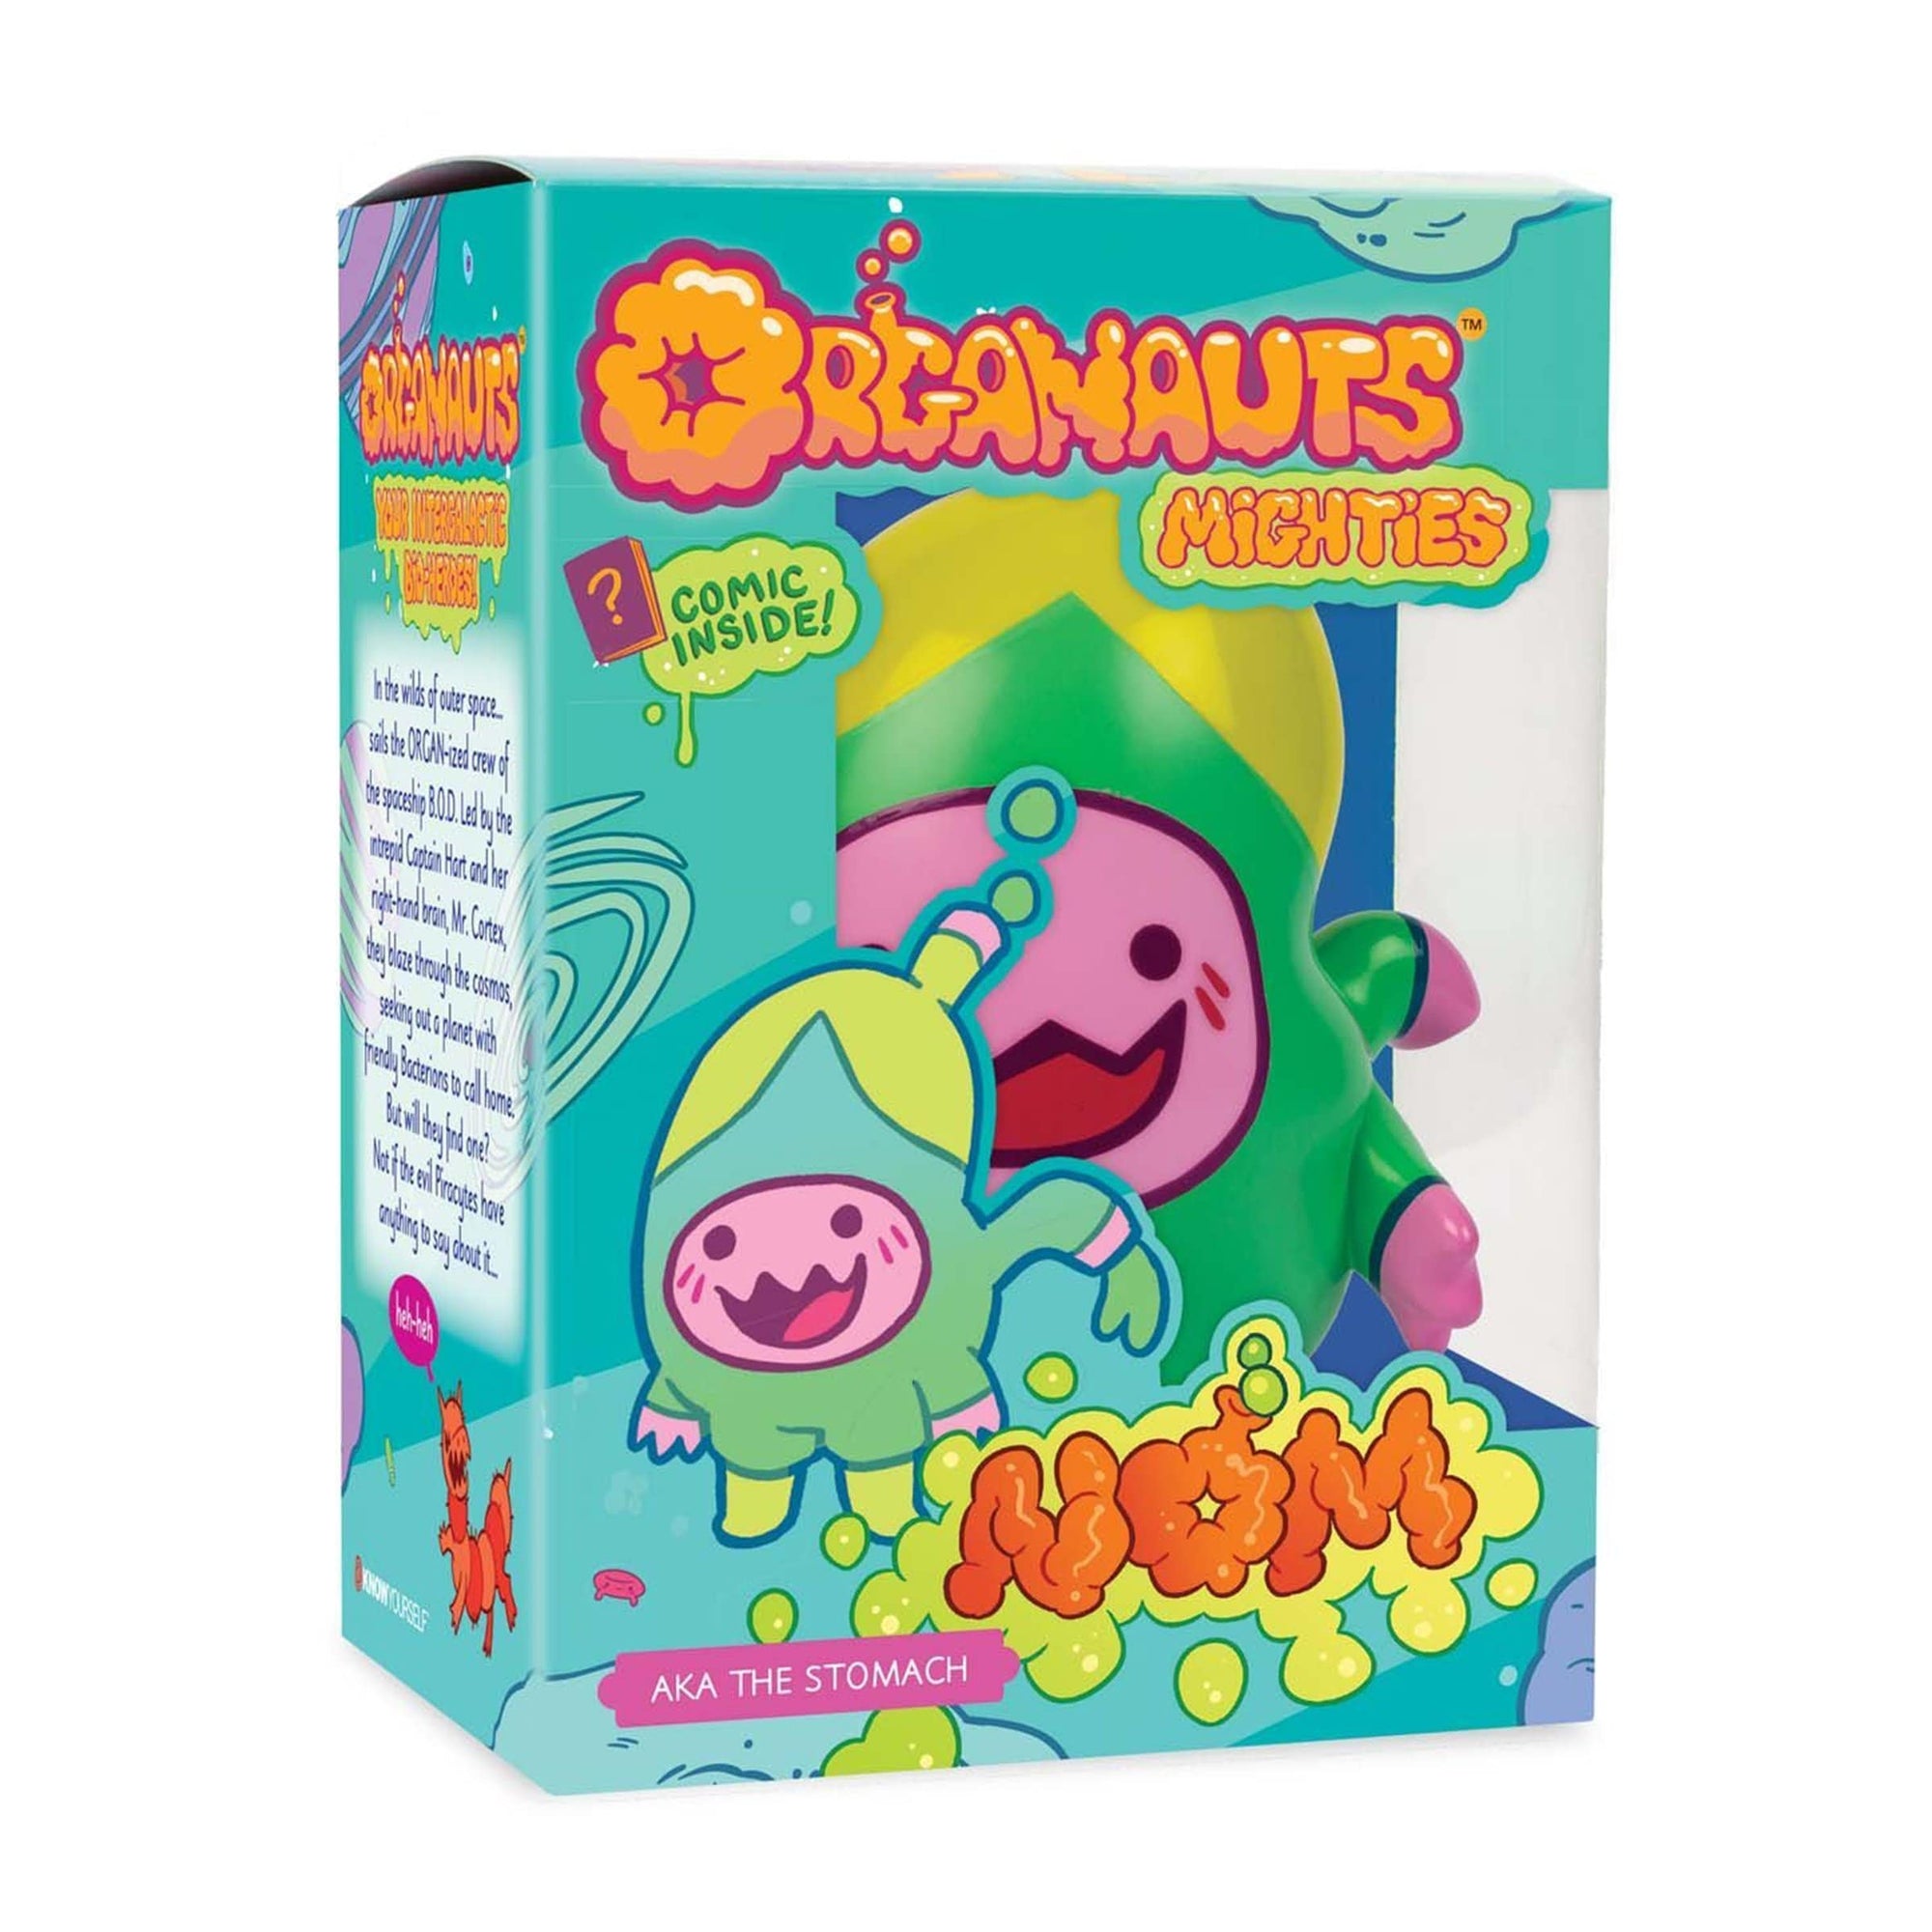 Nom - The Stomach - Organ Learning Toy